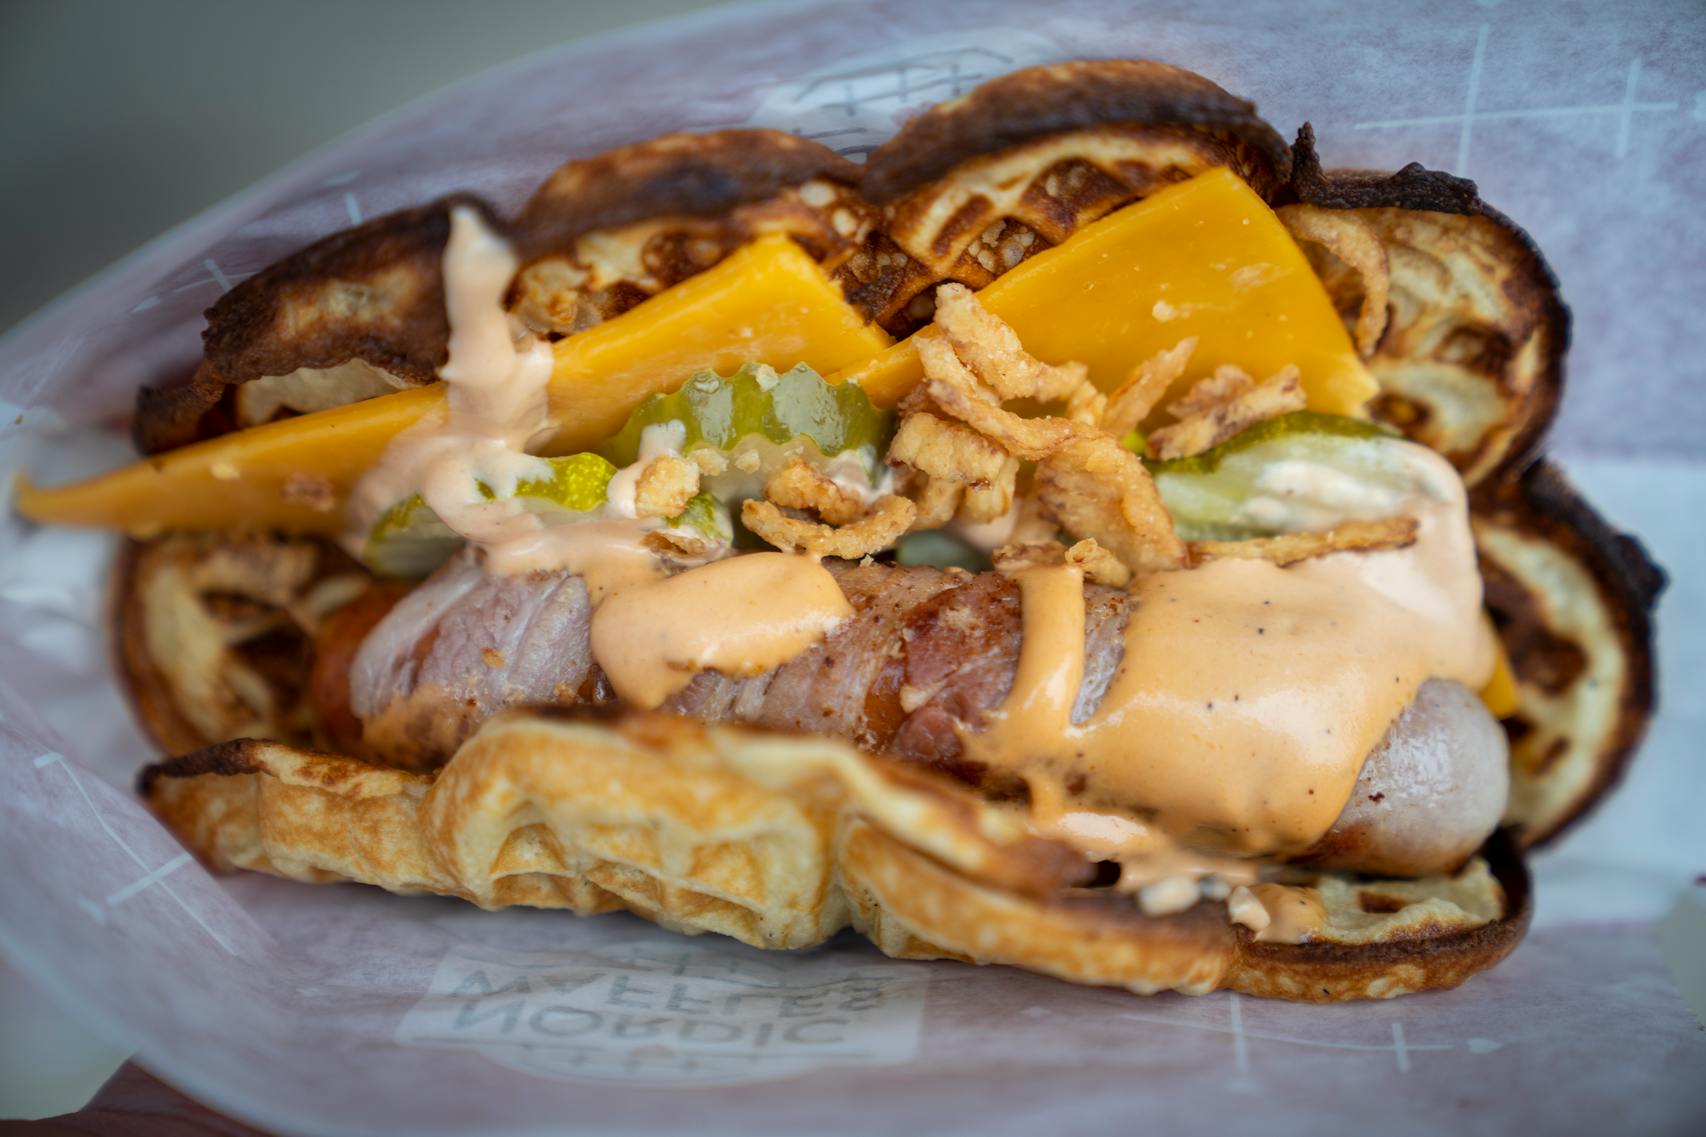 The Bacon-Wrapped Waffle Dog from Nordic Waffles. The new foods of the 2023 Minnesota State Fair photographed on the first day of the fair in Falcon Heights, Minn. on Tuesday, Aug. 8, 2023. ] LEILA NAVIDI • leila.navidi@startribune.com